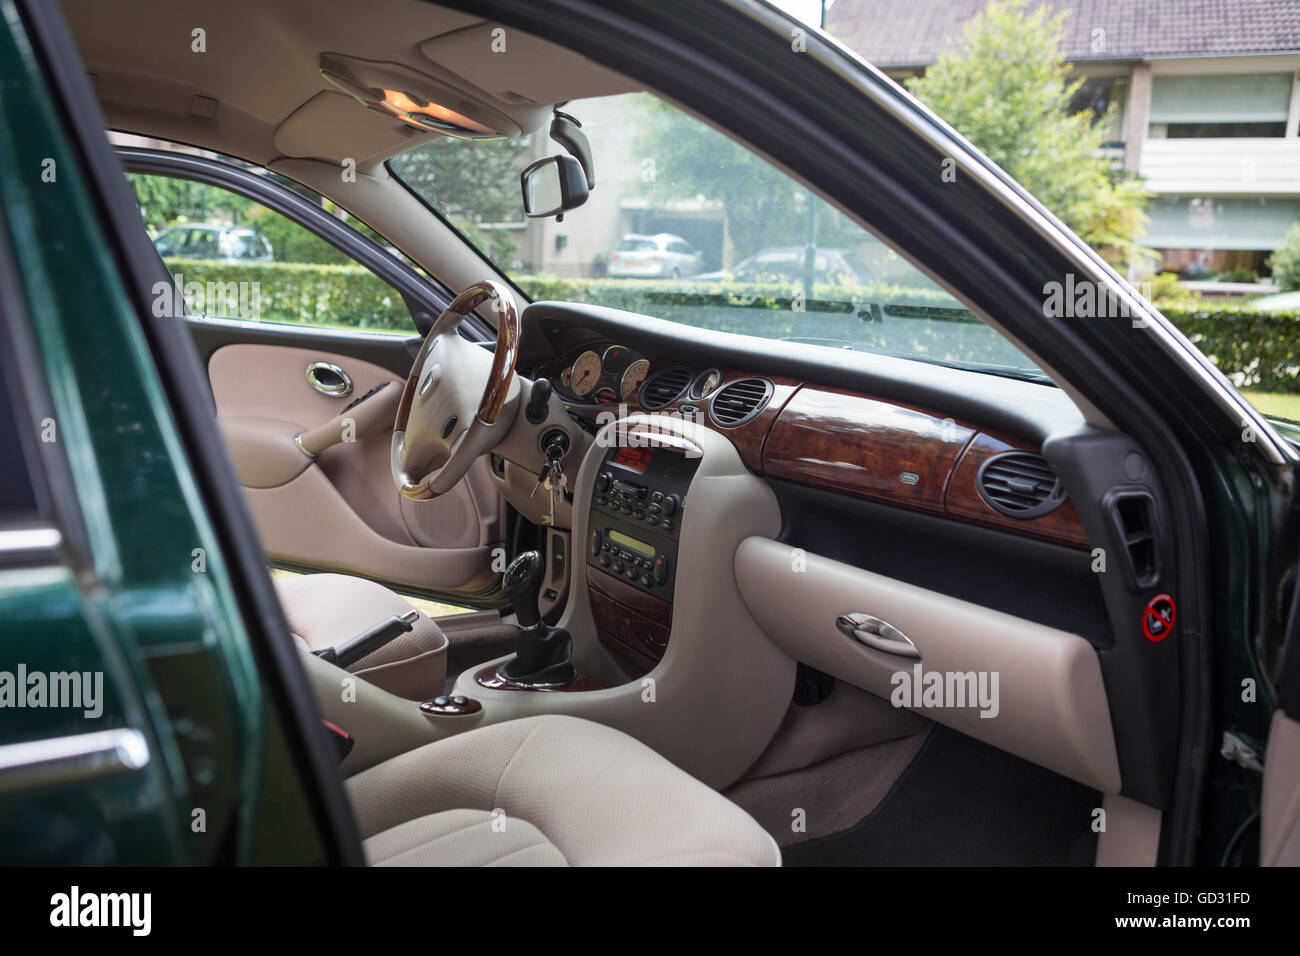 Rover 75 Car Interior Color Green With A Walnut Dashboard